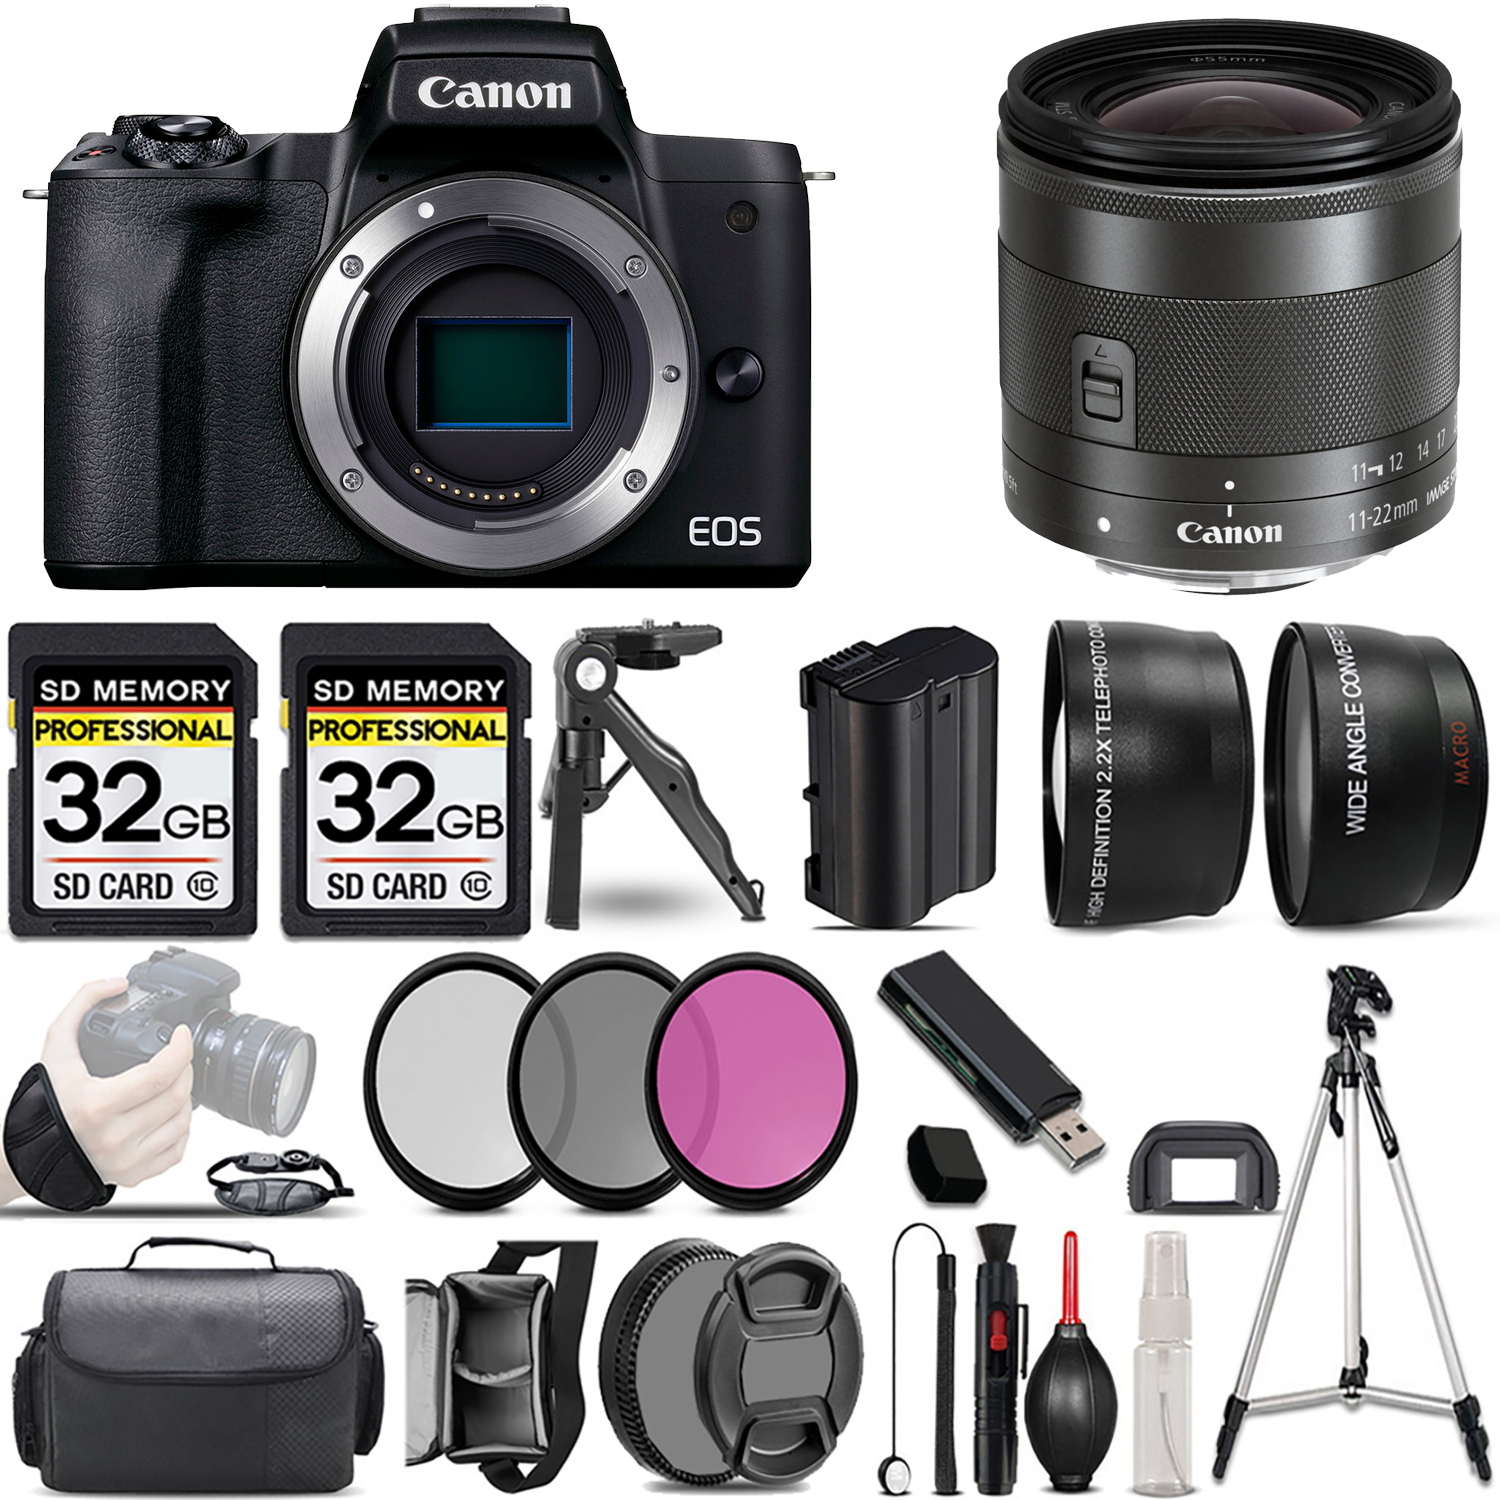 EOS M50 Mark II (Black) + 11-22mm f/4-5.6 IS STM Lens + 3 Piece Filter Set + 64GB - Kit *FREE SHIPPING*